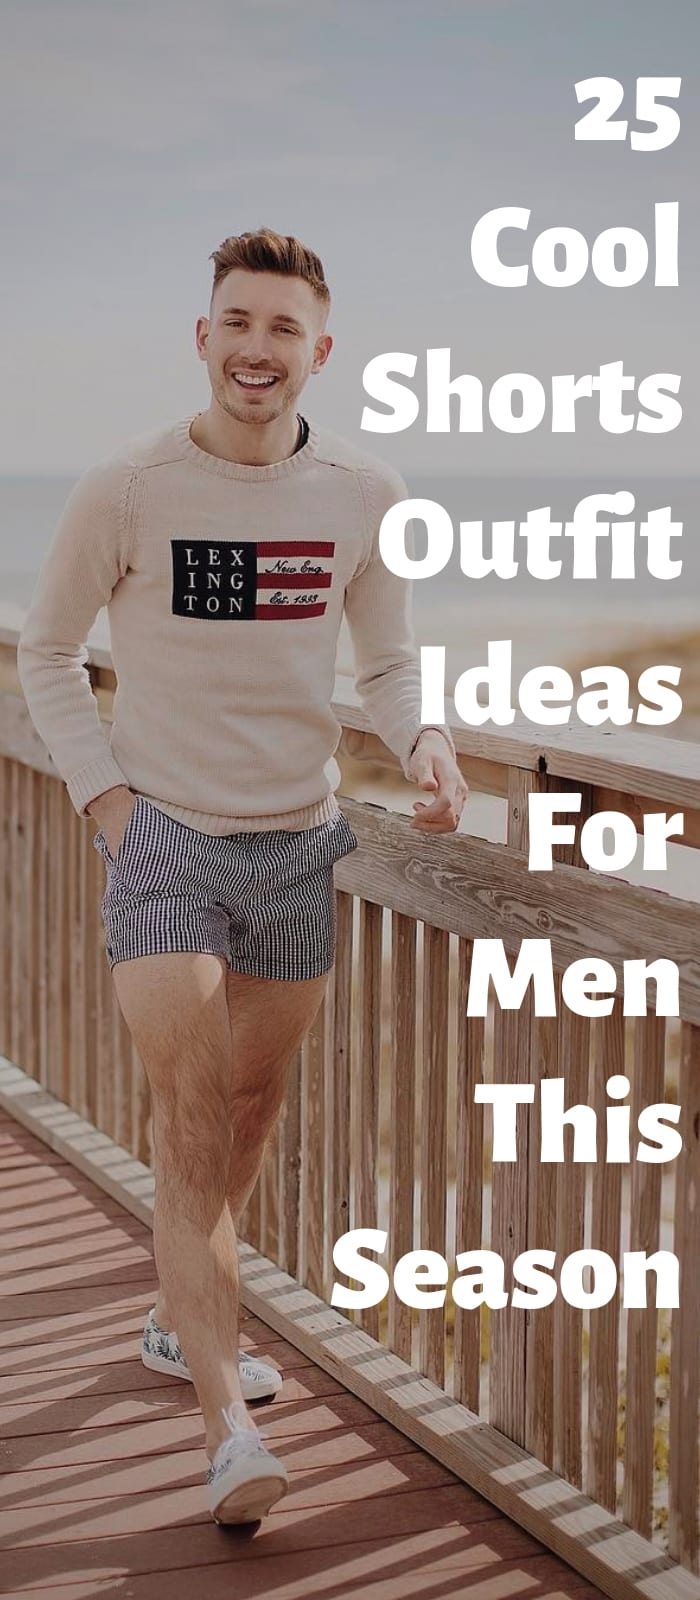 25 Cool Shorts Outfit Ideas For Men This Season (1)